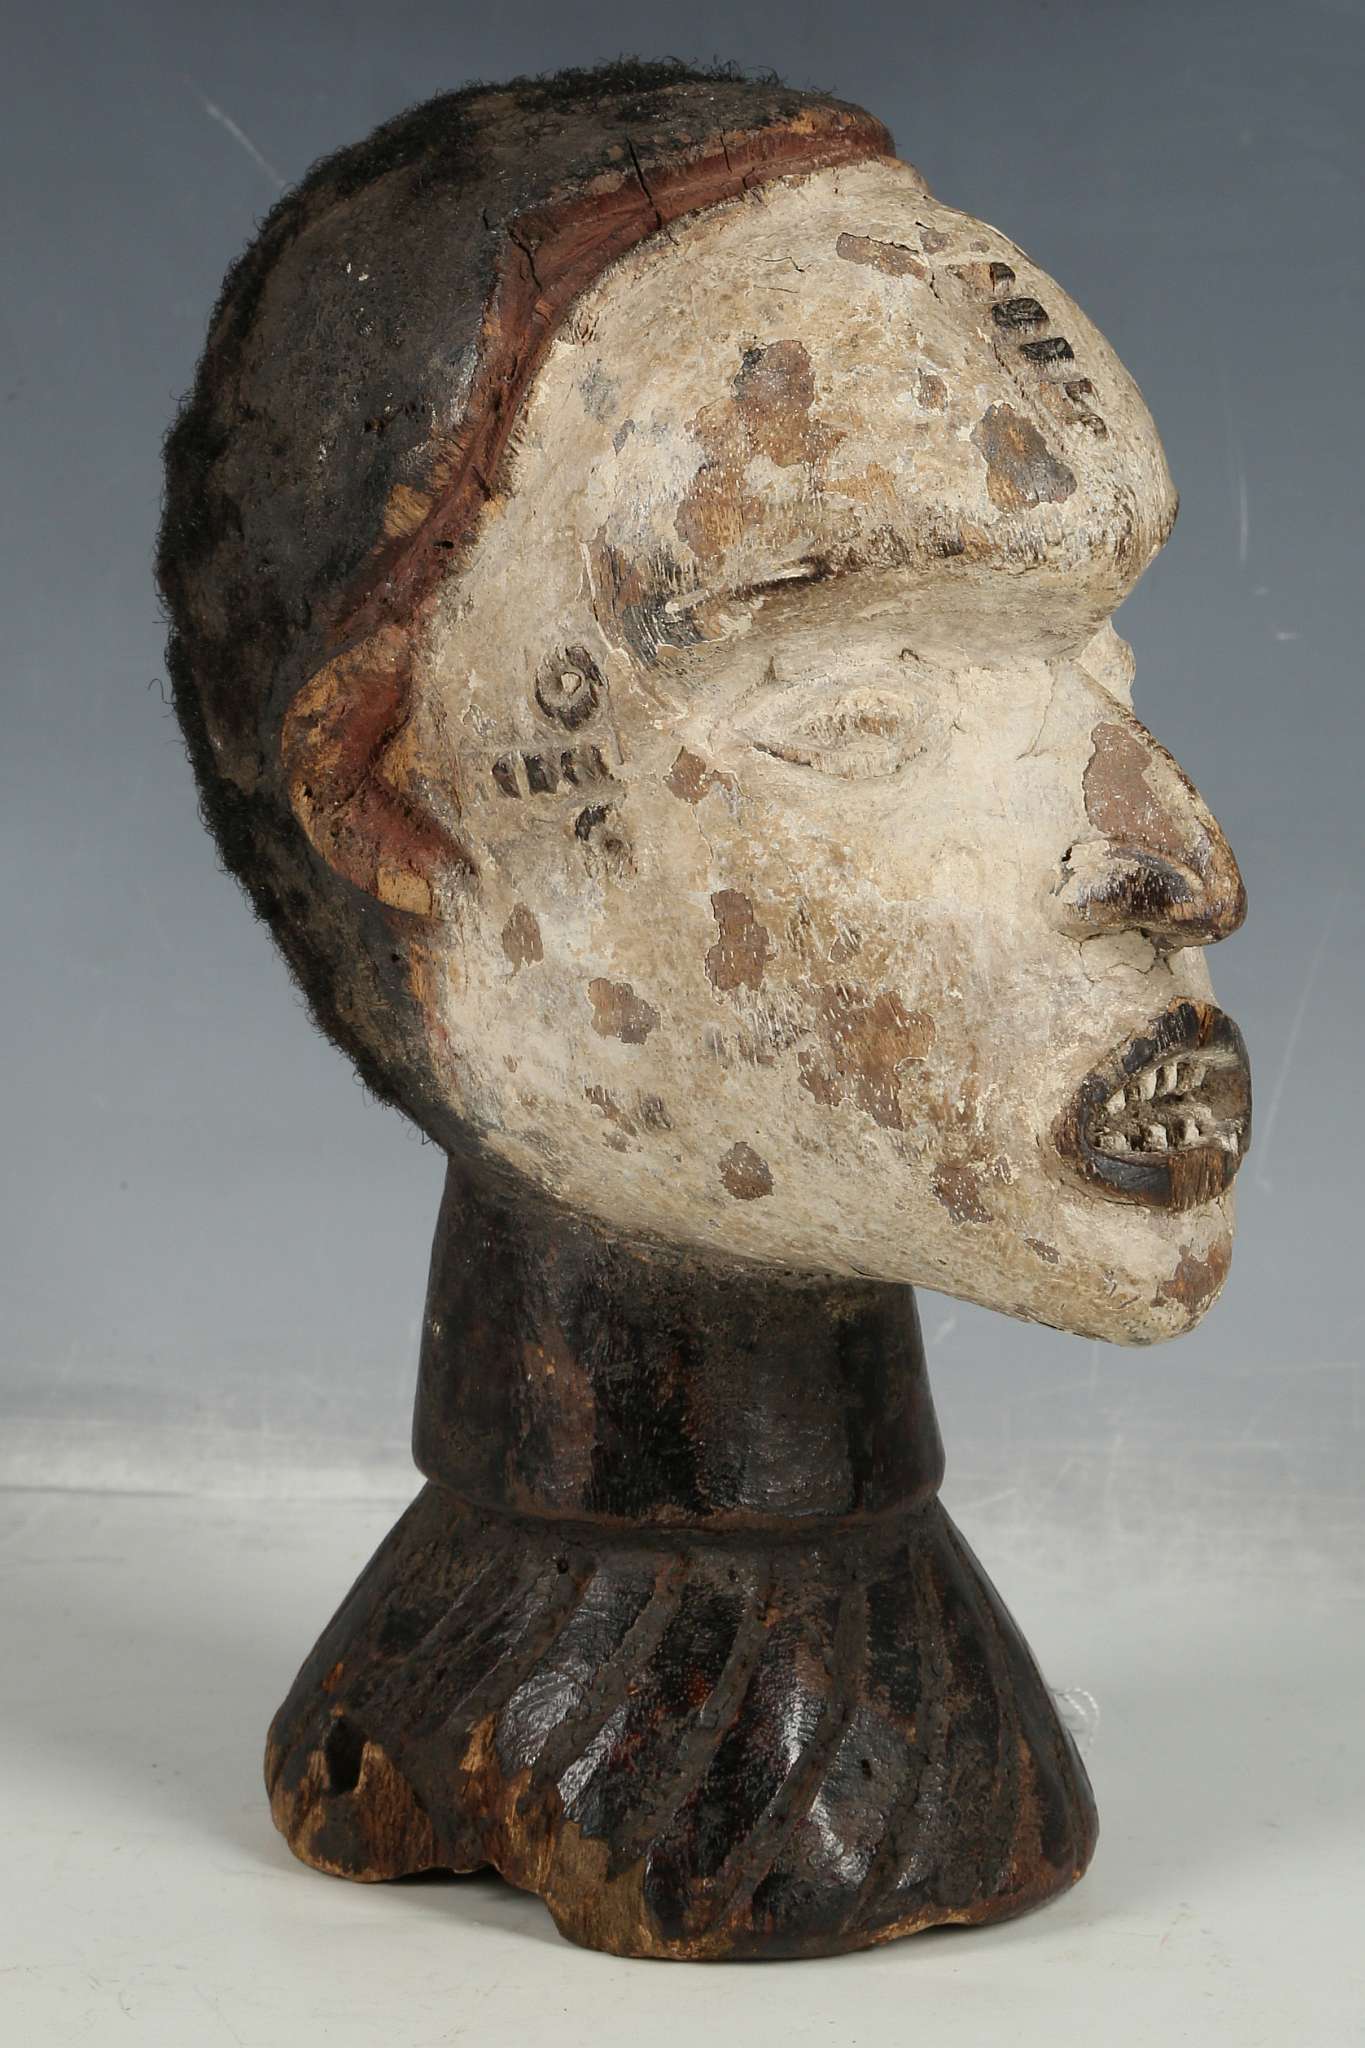 African tribal headdress bust, Ibo tribe Nigeria, hand painted with real hair applied, 22cm.